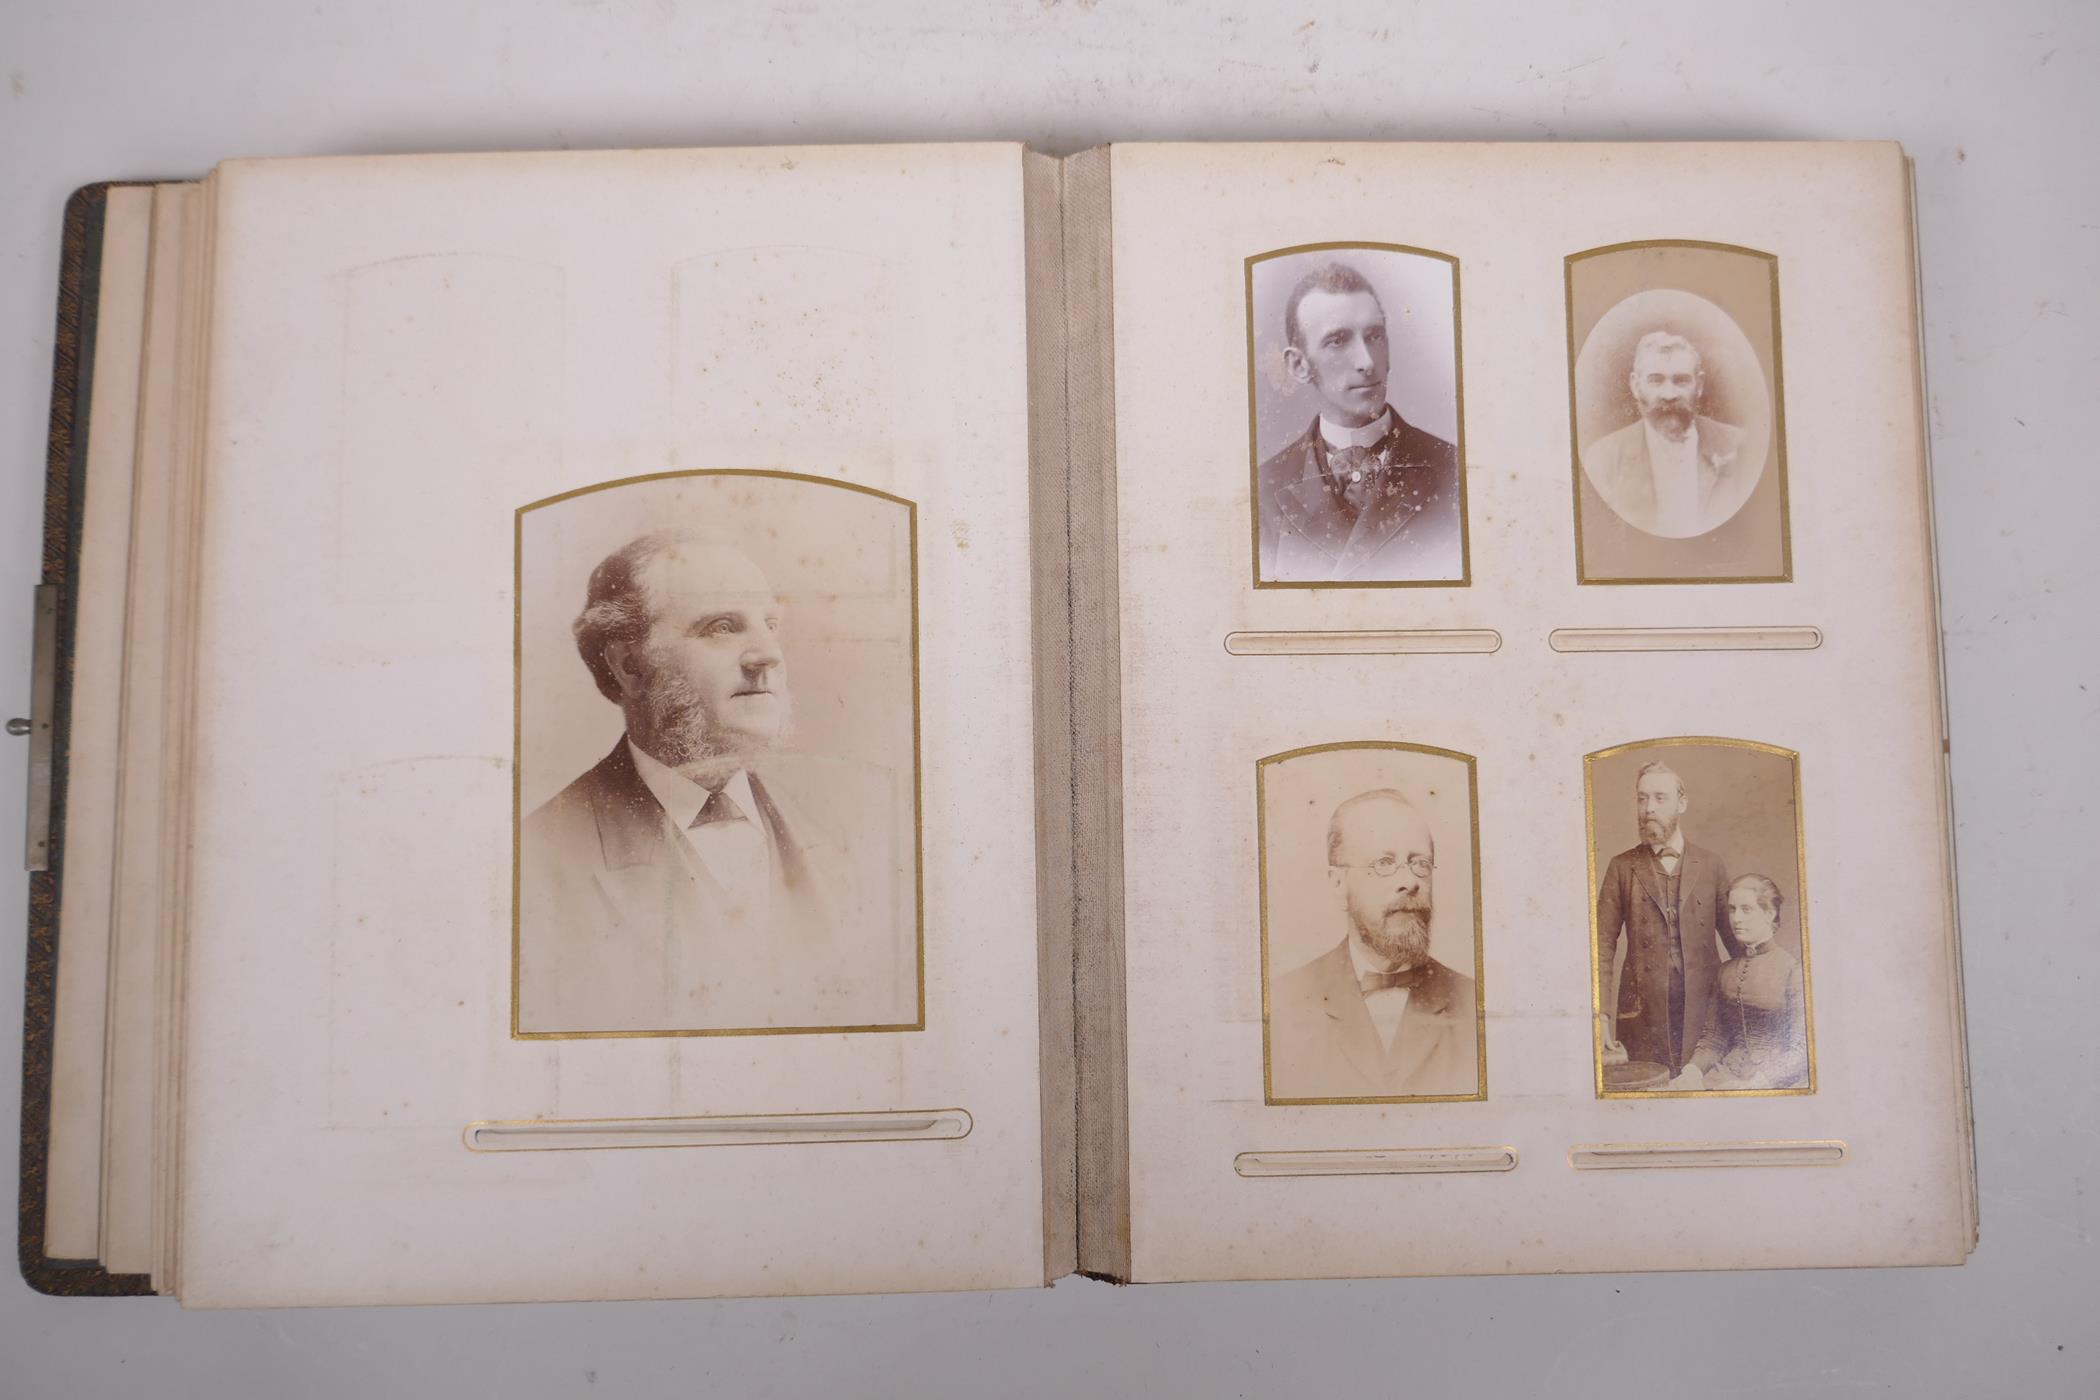 A late C19th/early C20th German leather bound photograph album containing portrait photos from the - Image 4 of 7